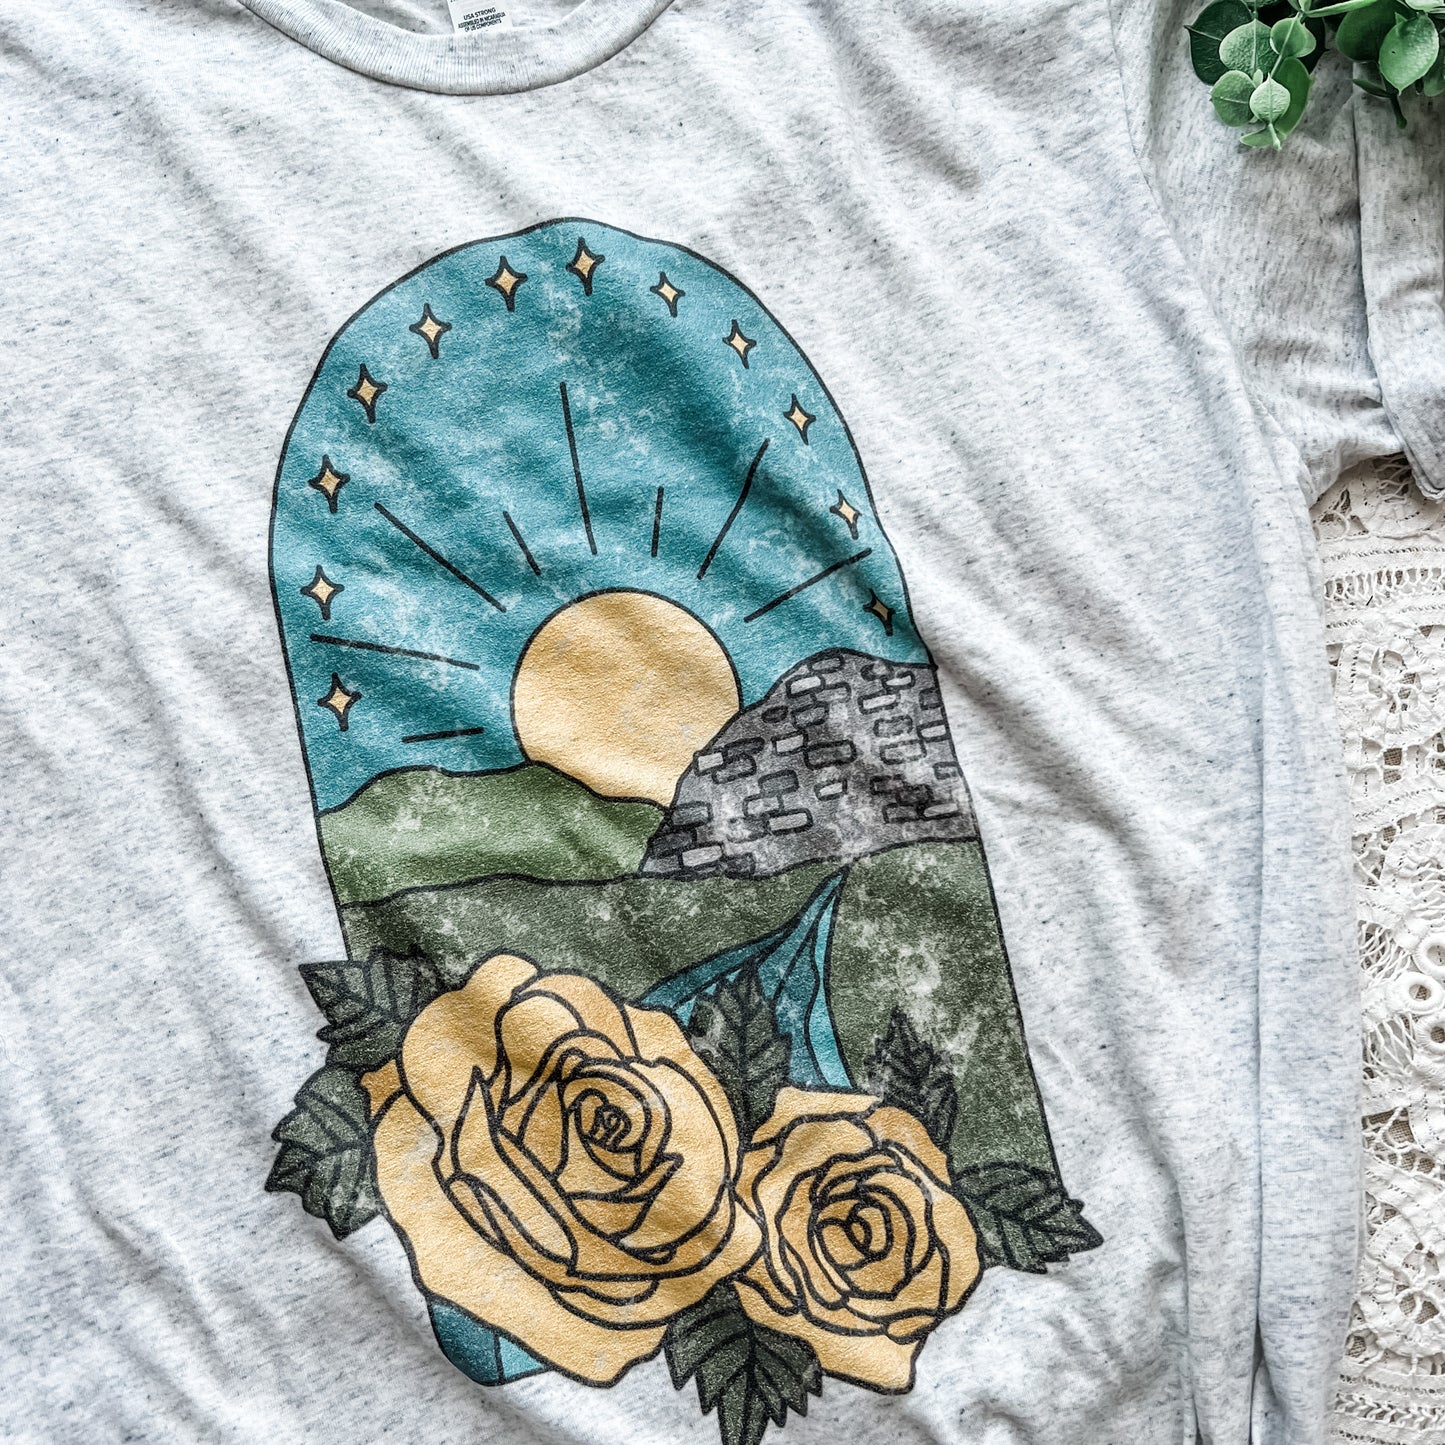 Vintage Our Lady of Lourdes Inspired Short sleeve triblend t-shirt